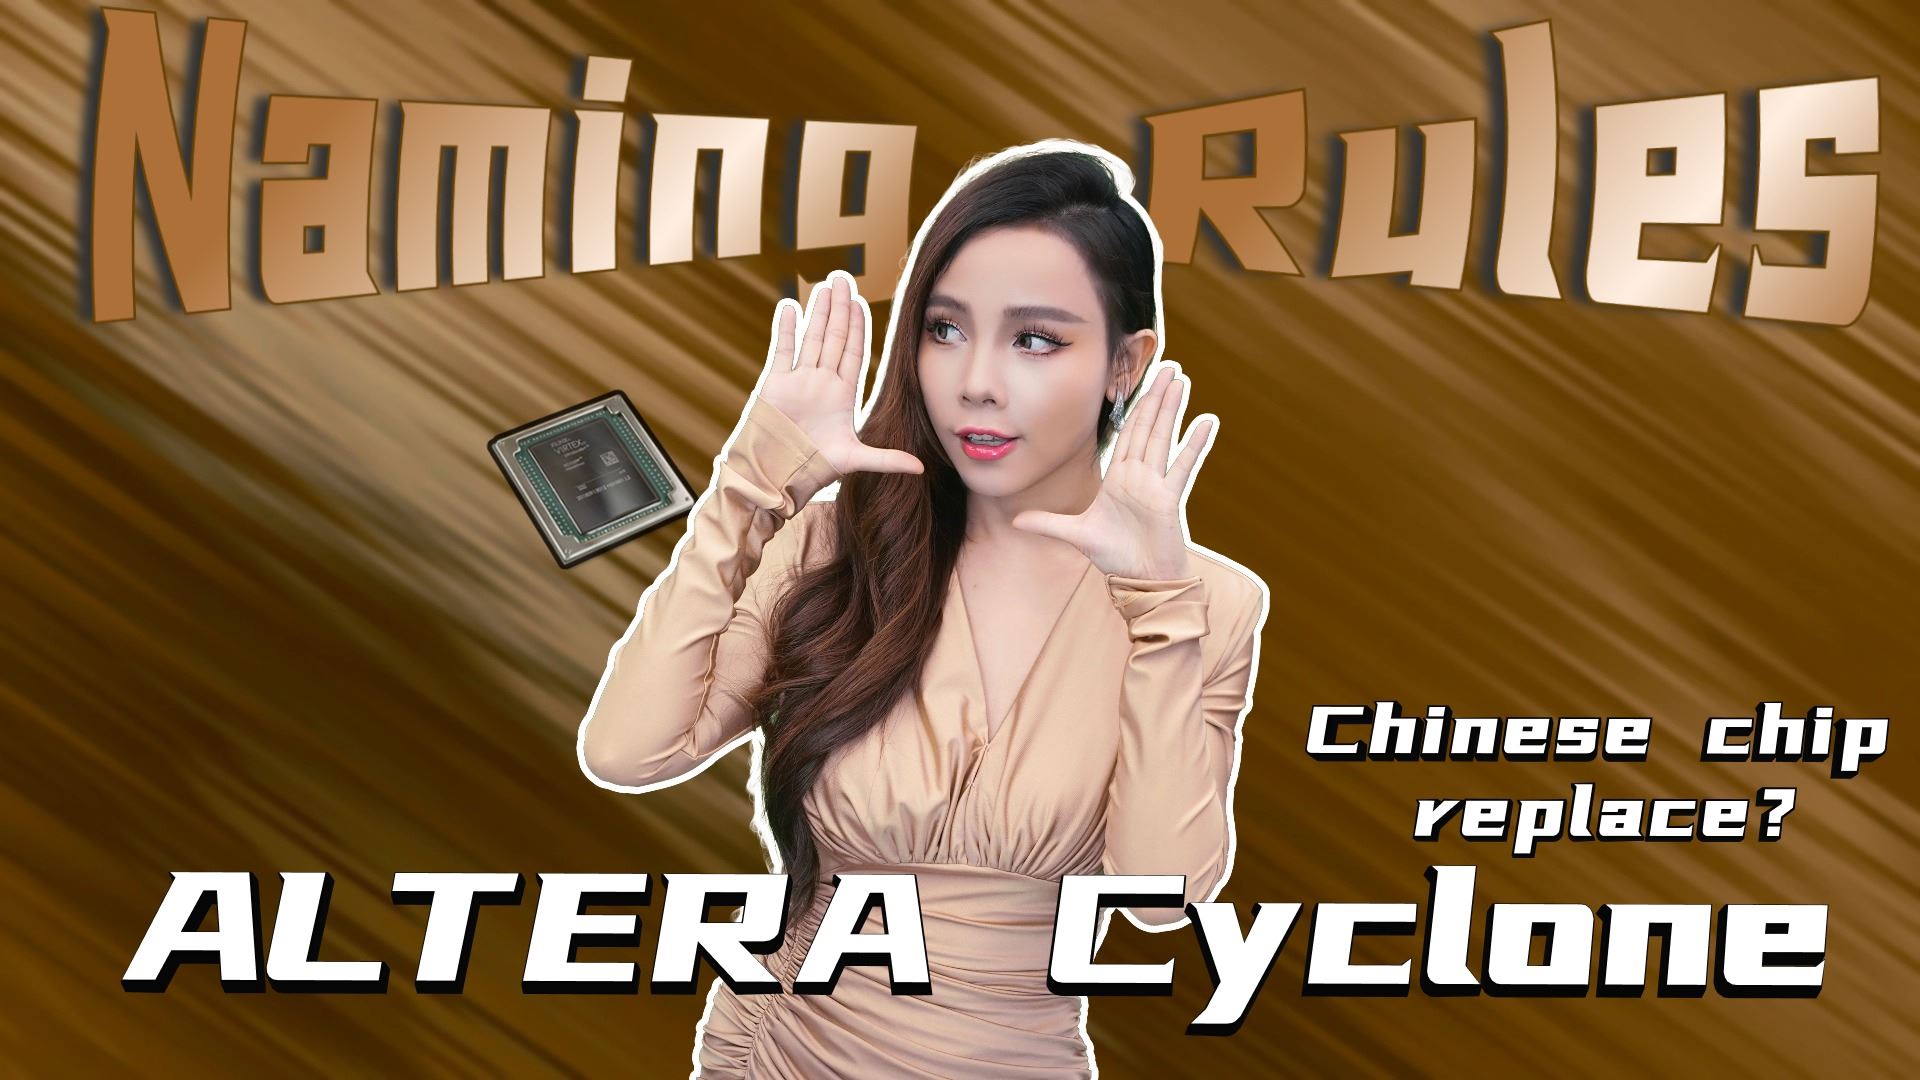 Chip Altera Cyclone naming rules，Chinese chip Will replace it？